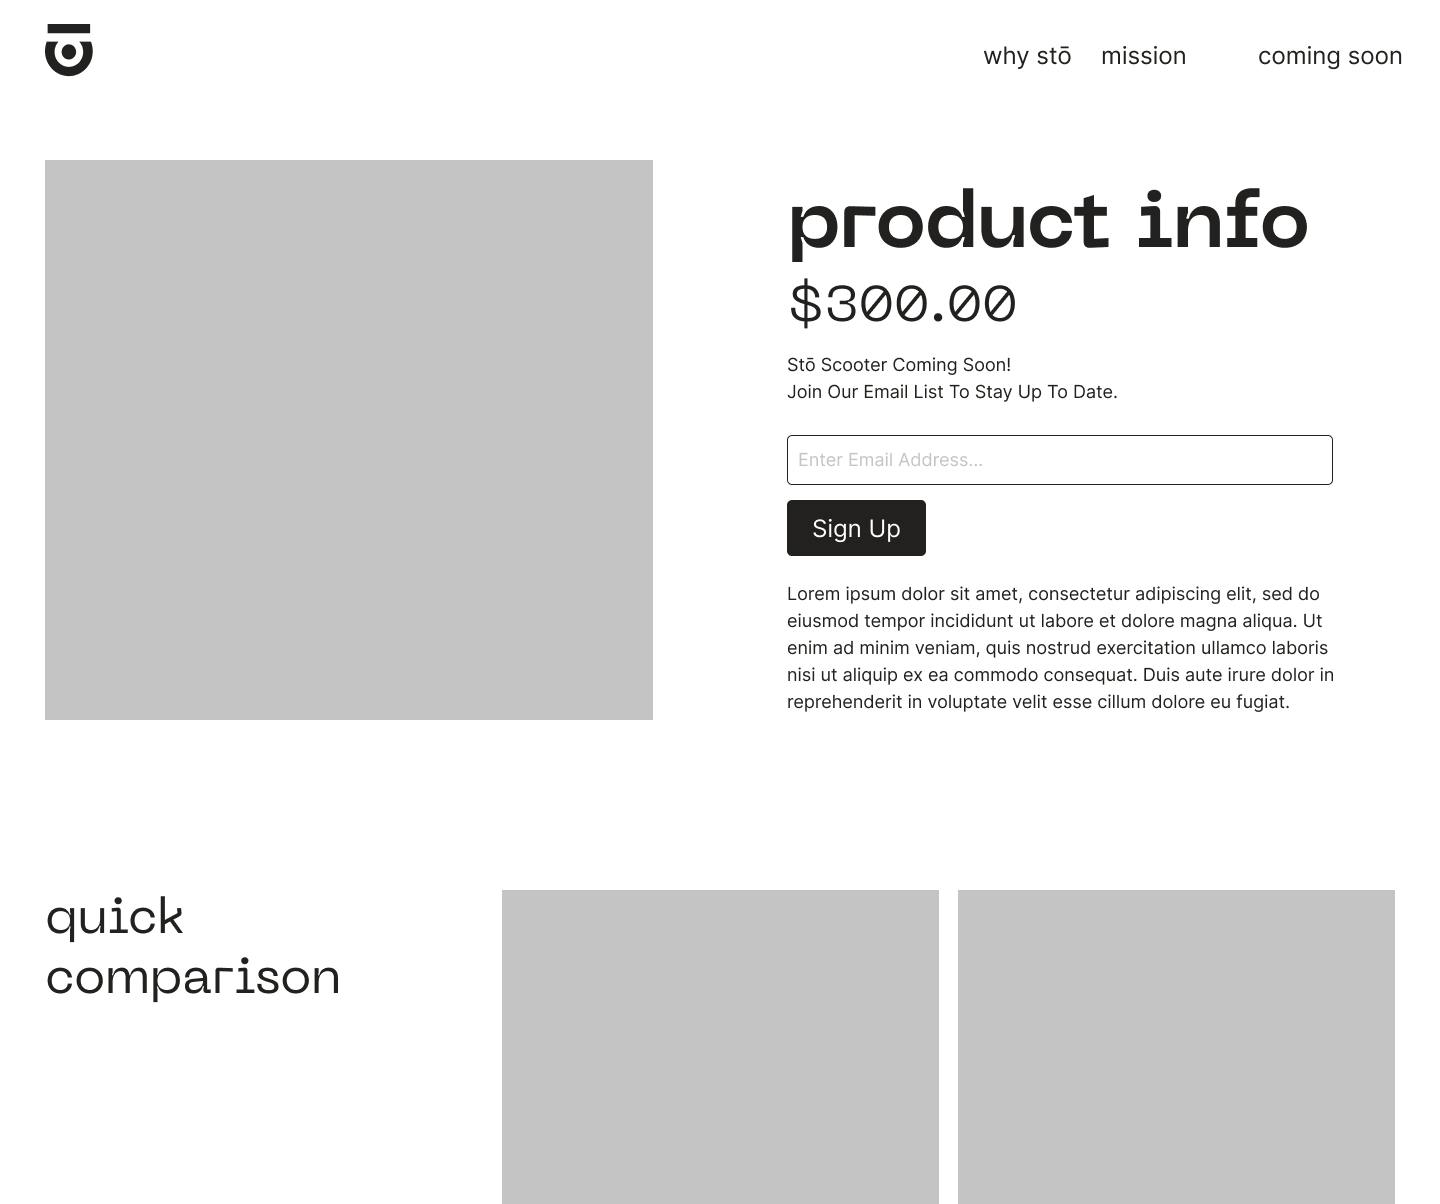 Lo-fidelity design of the product page.